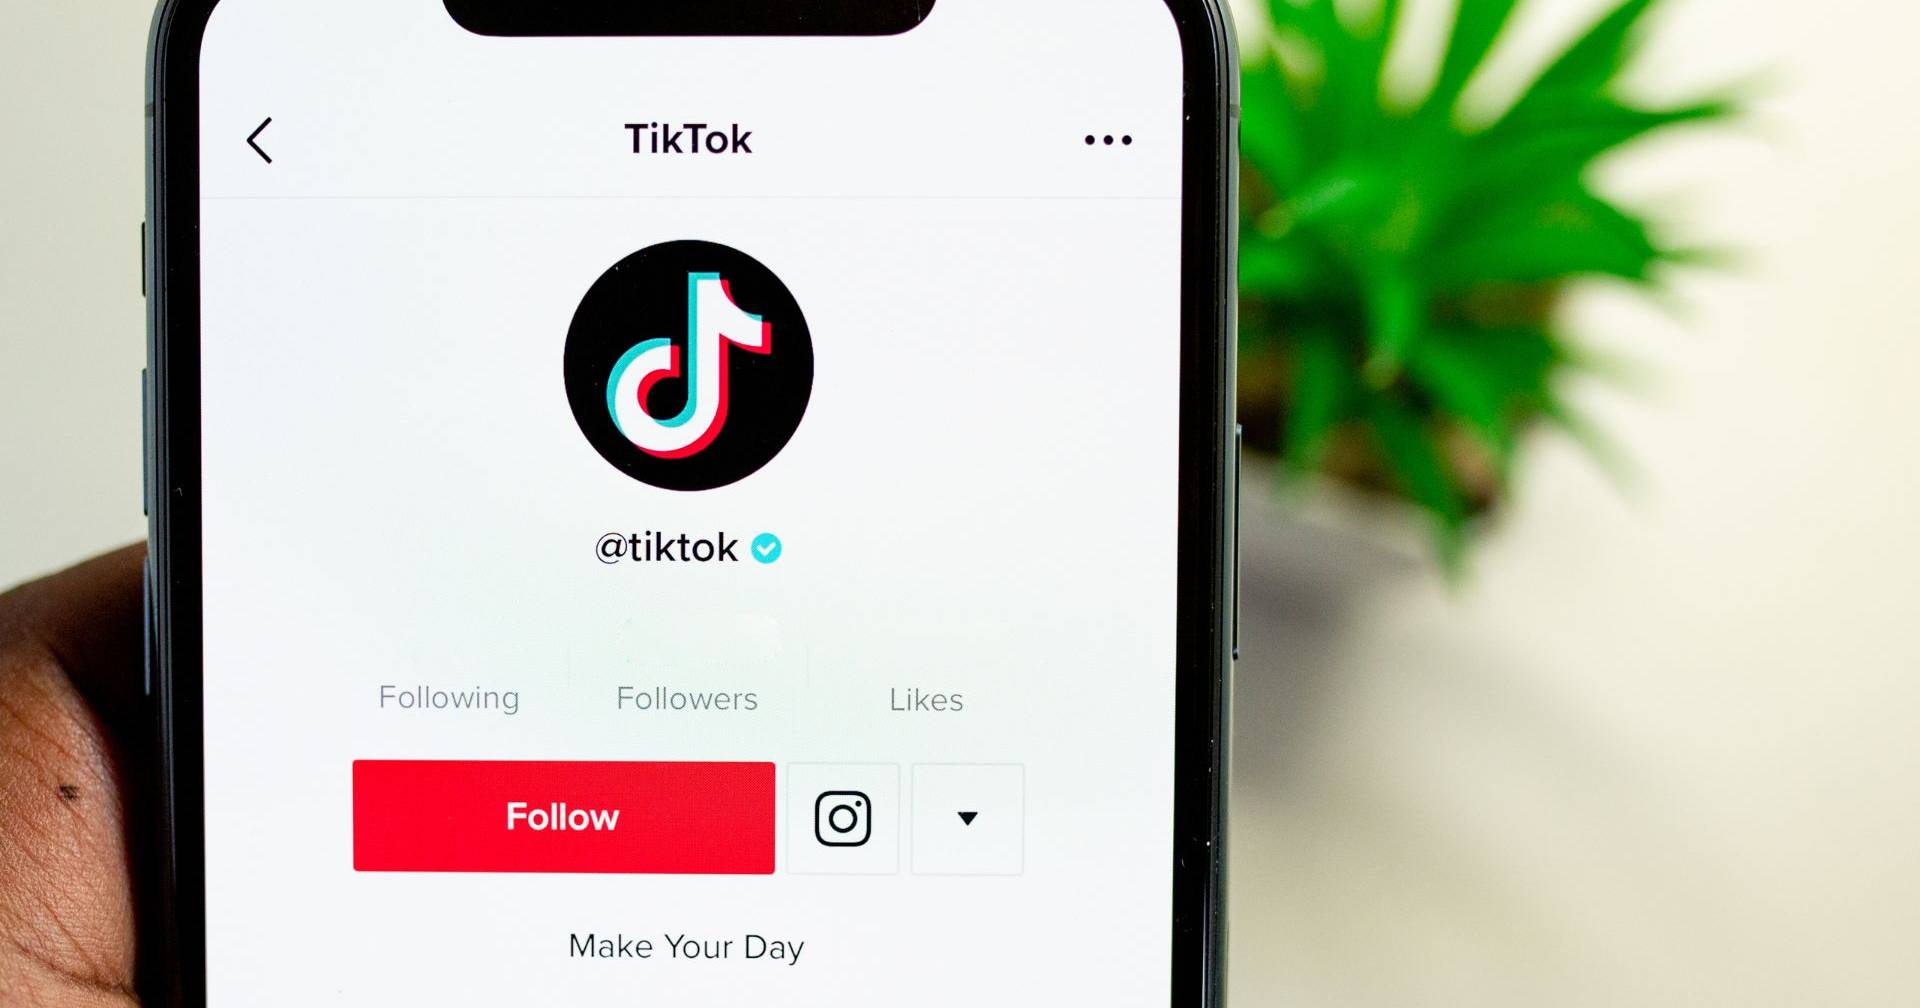 France will also ban the use of TikTok by civil servants